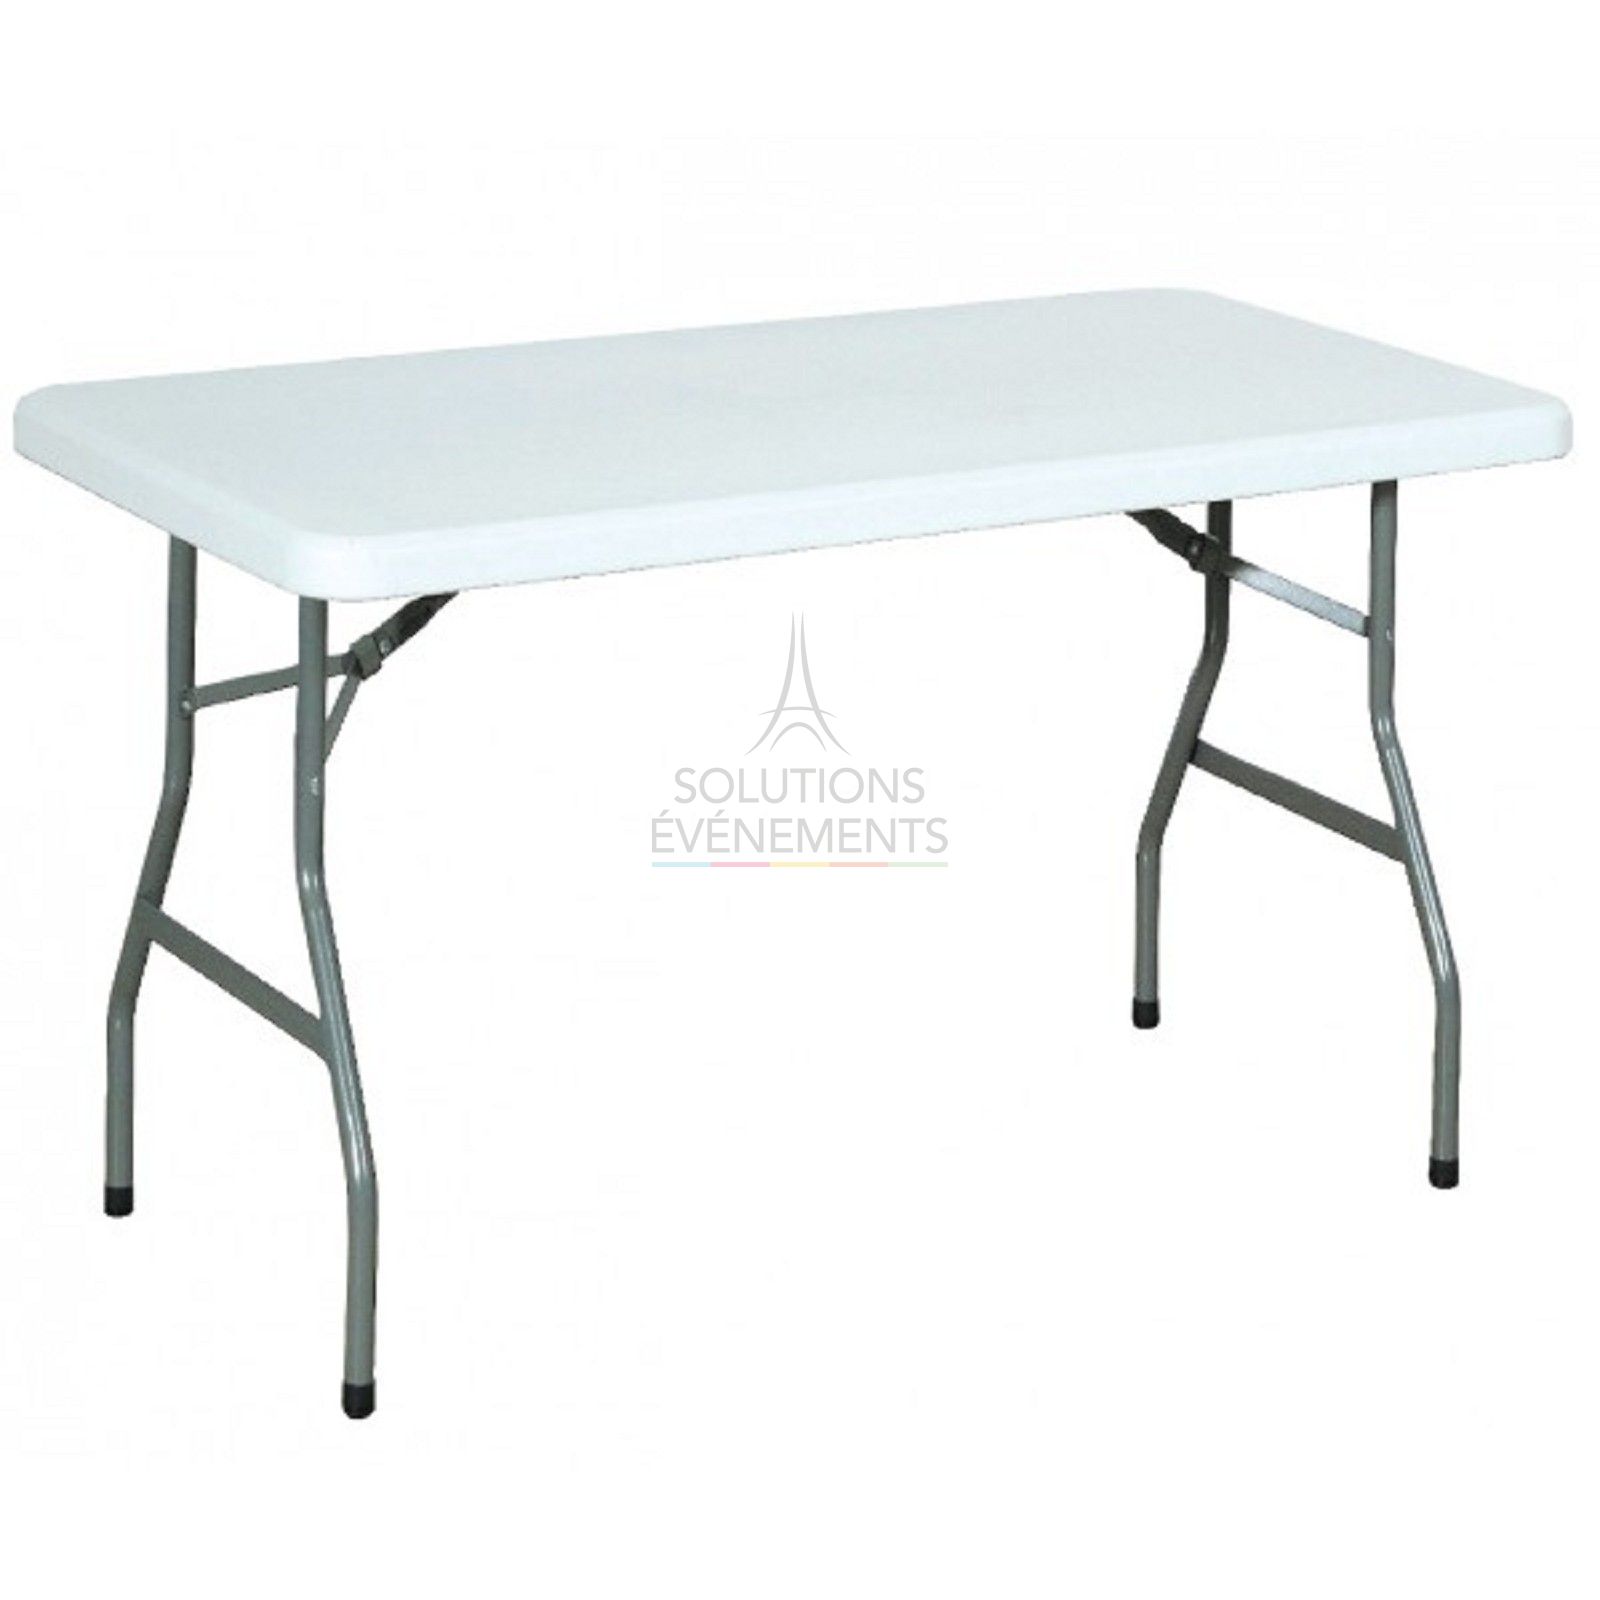 Plastic rectangle table rental. For approximately 4 people